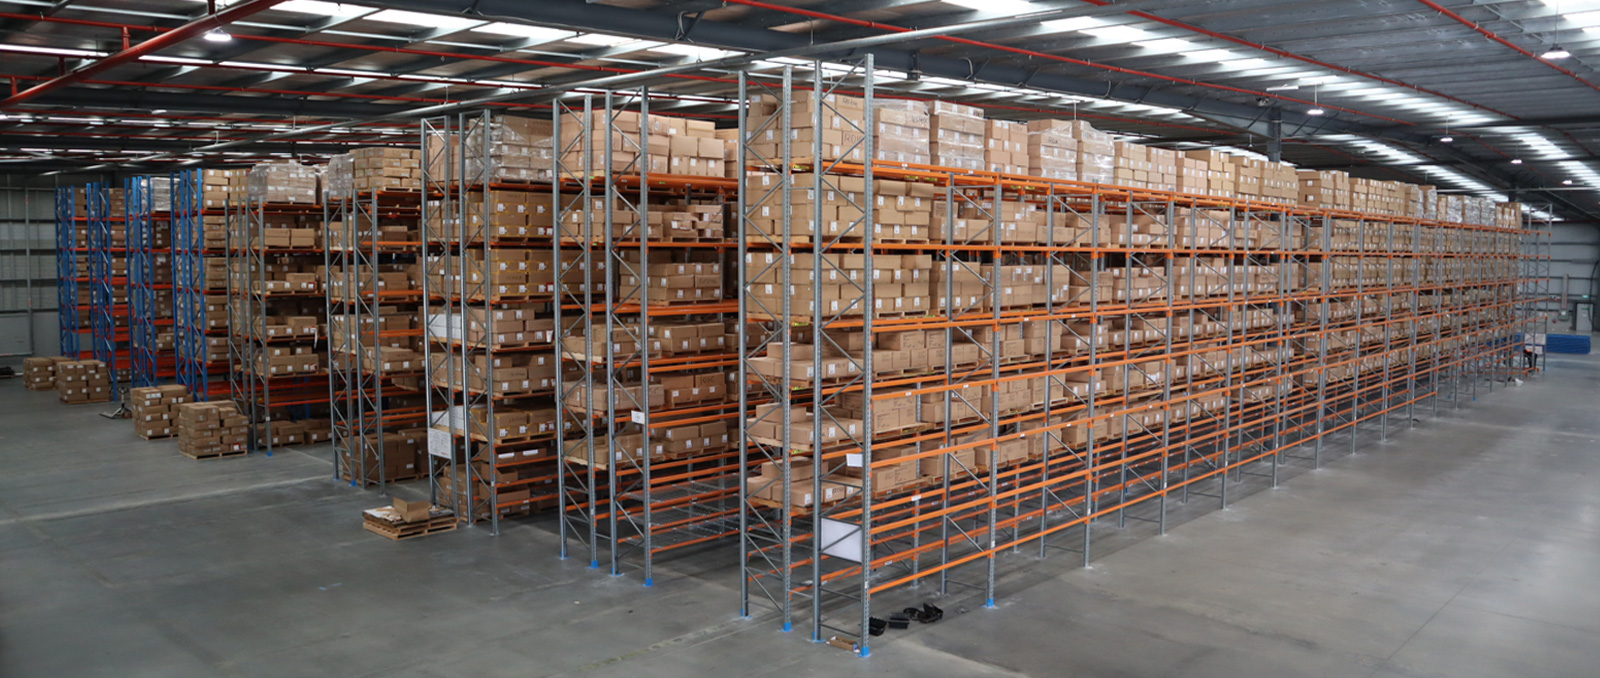 Selective pallet racking in a warehouse